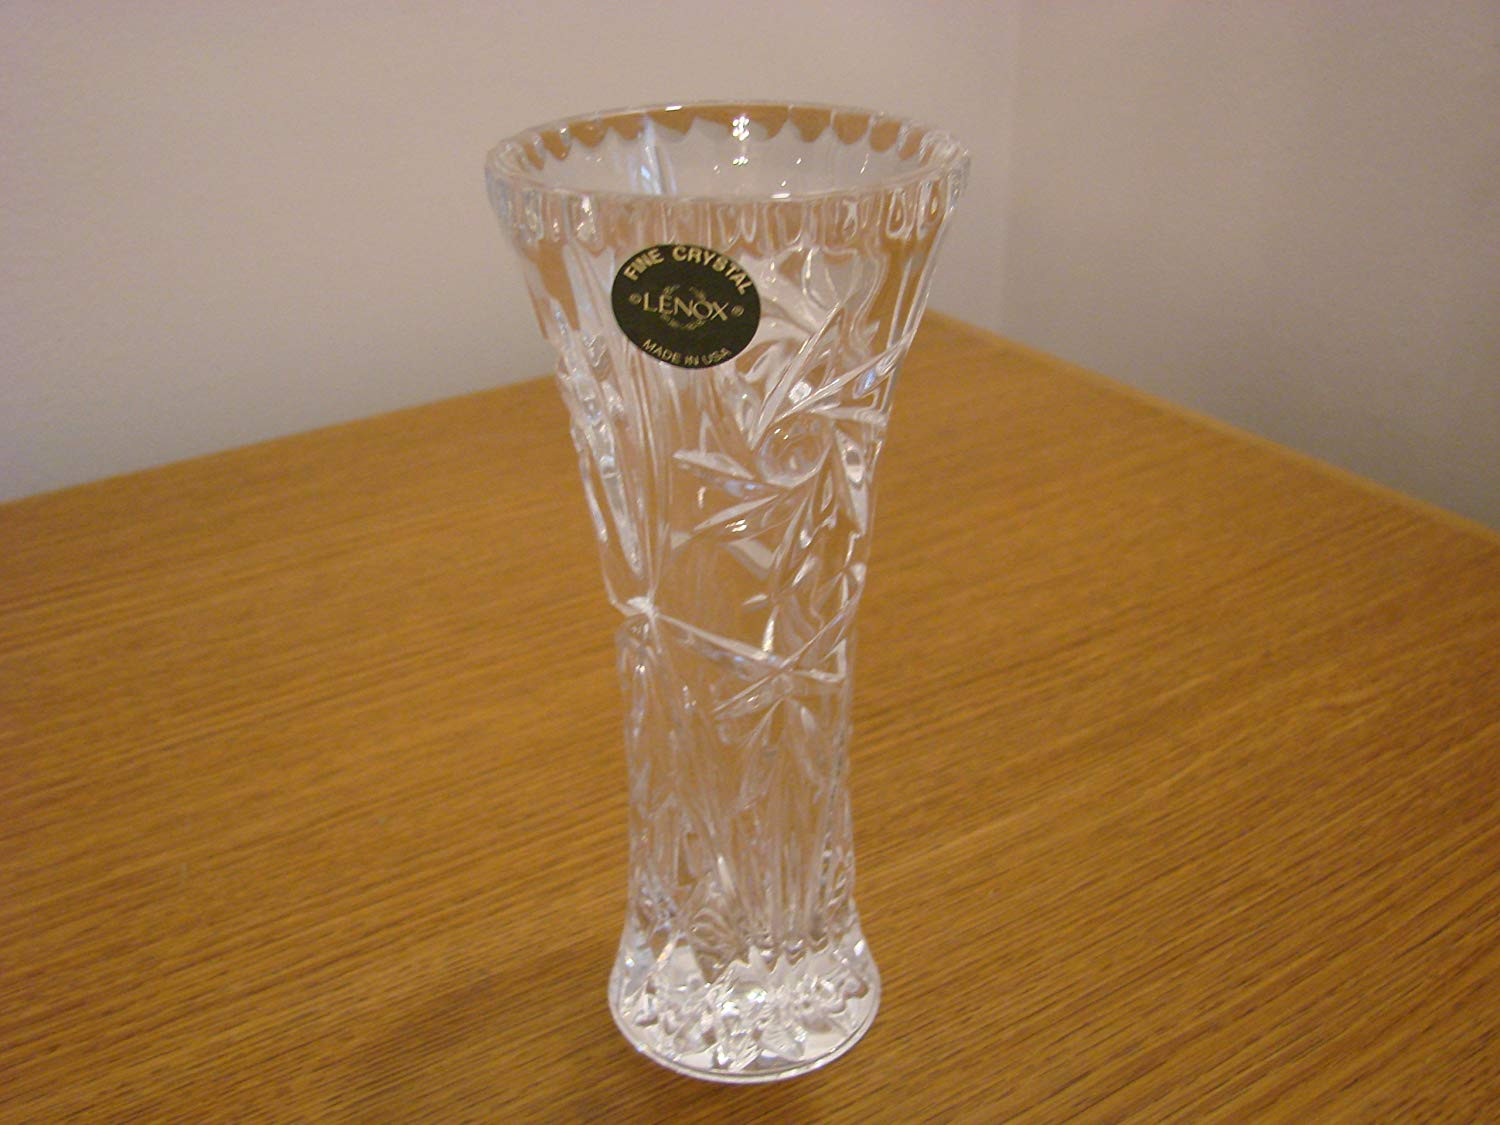 10 Fabulous Waterford Lismore Vase 8 2024 free download waterford lismore vase 8 of amazon com lenox crystal star vase from lenox collections 6 inches with amazon com lenox crystal star vase from lenox collections 6 inches home kitchen